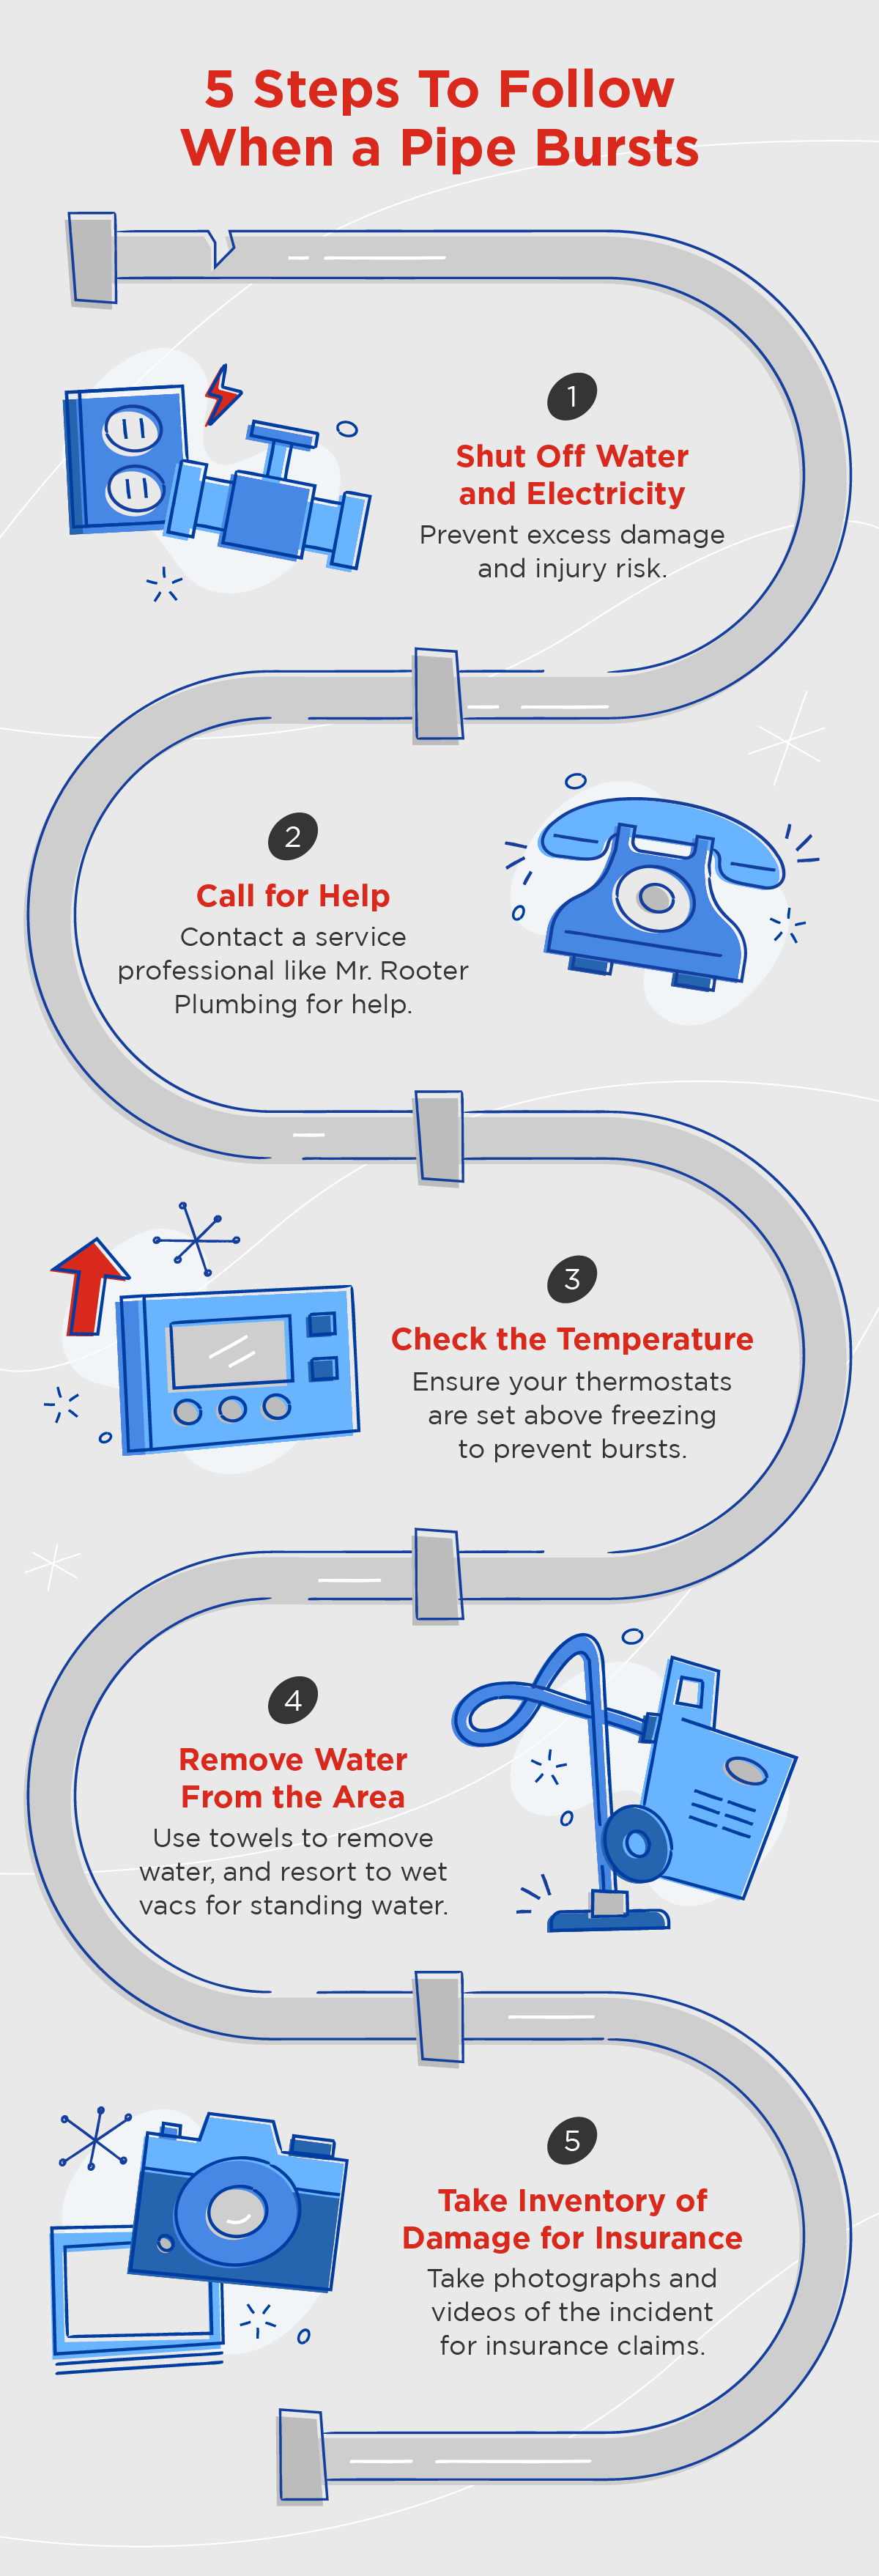 A chart showing the five steps to follow when a pipe bursts in your home.